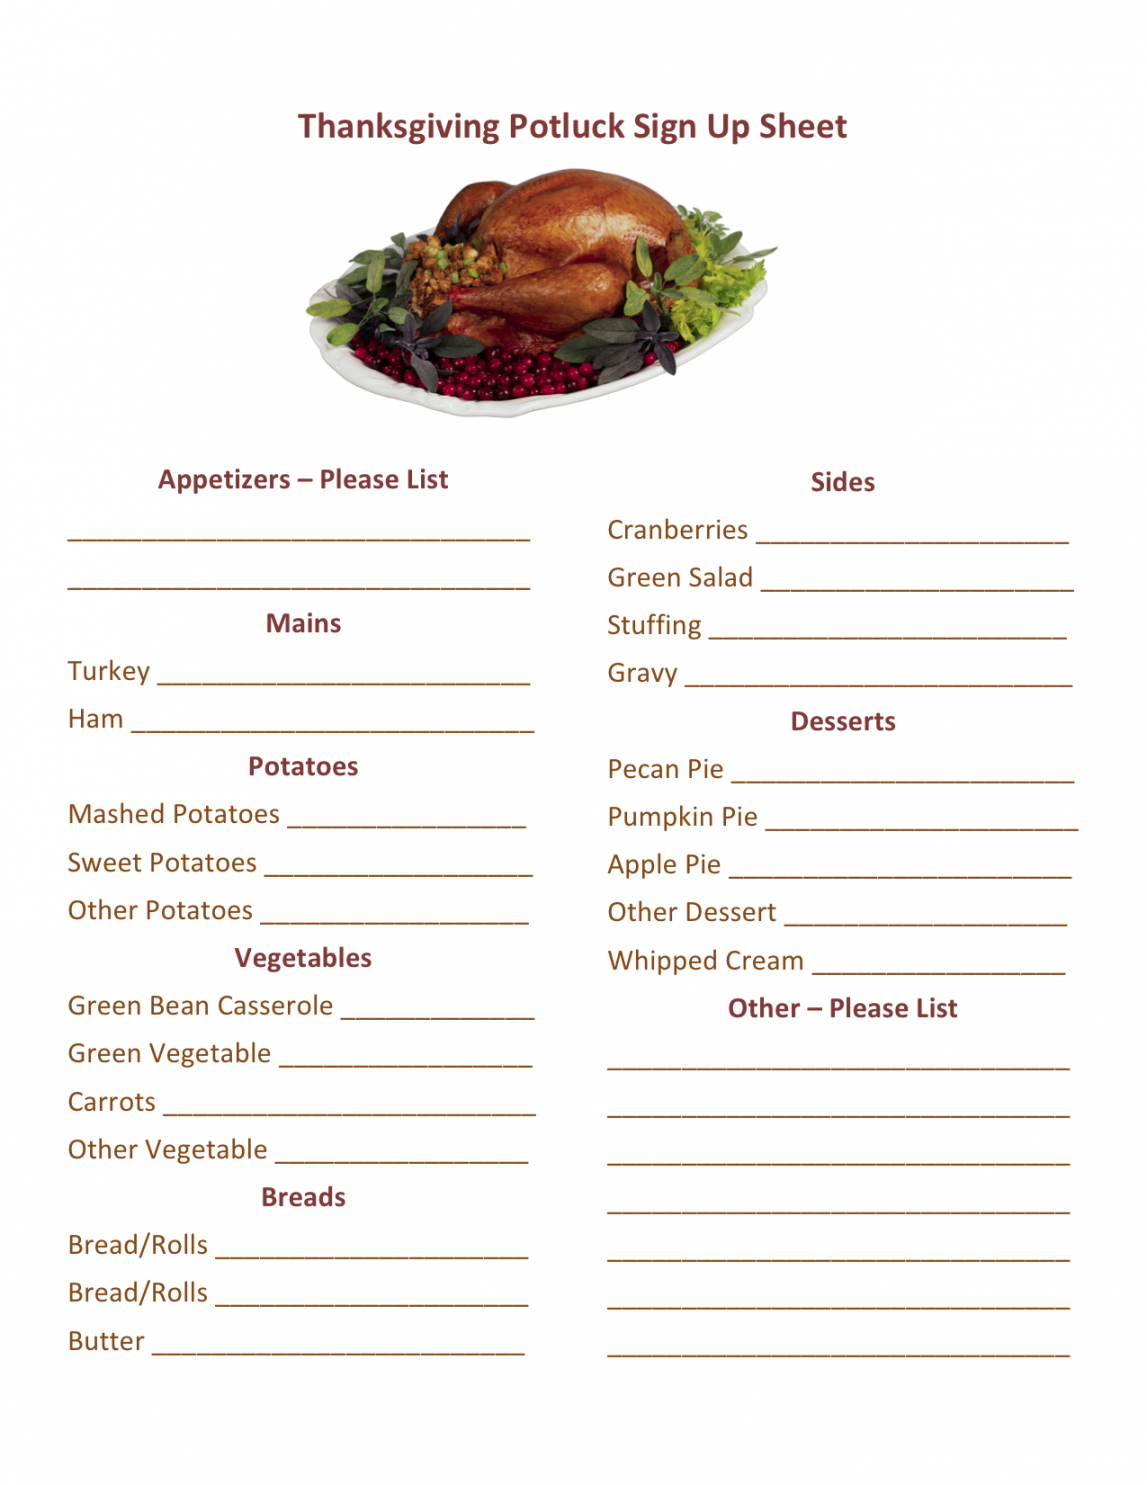 Thanksgiving Potluck Sign Up Printable  HMH Designs - FREE Printables - Free Printable Thanksgiving Potluck Sign Up Sheet